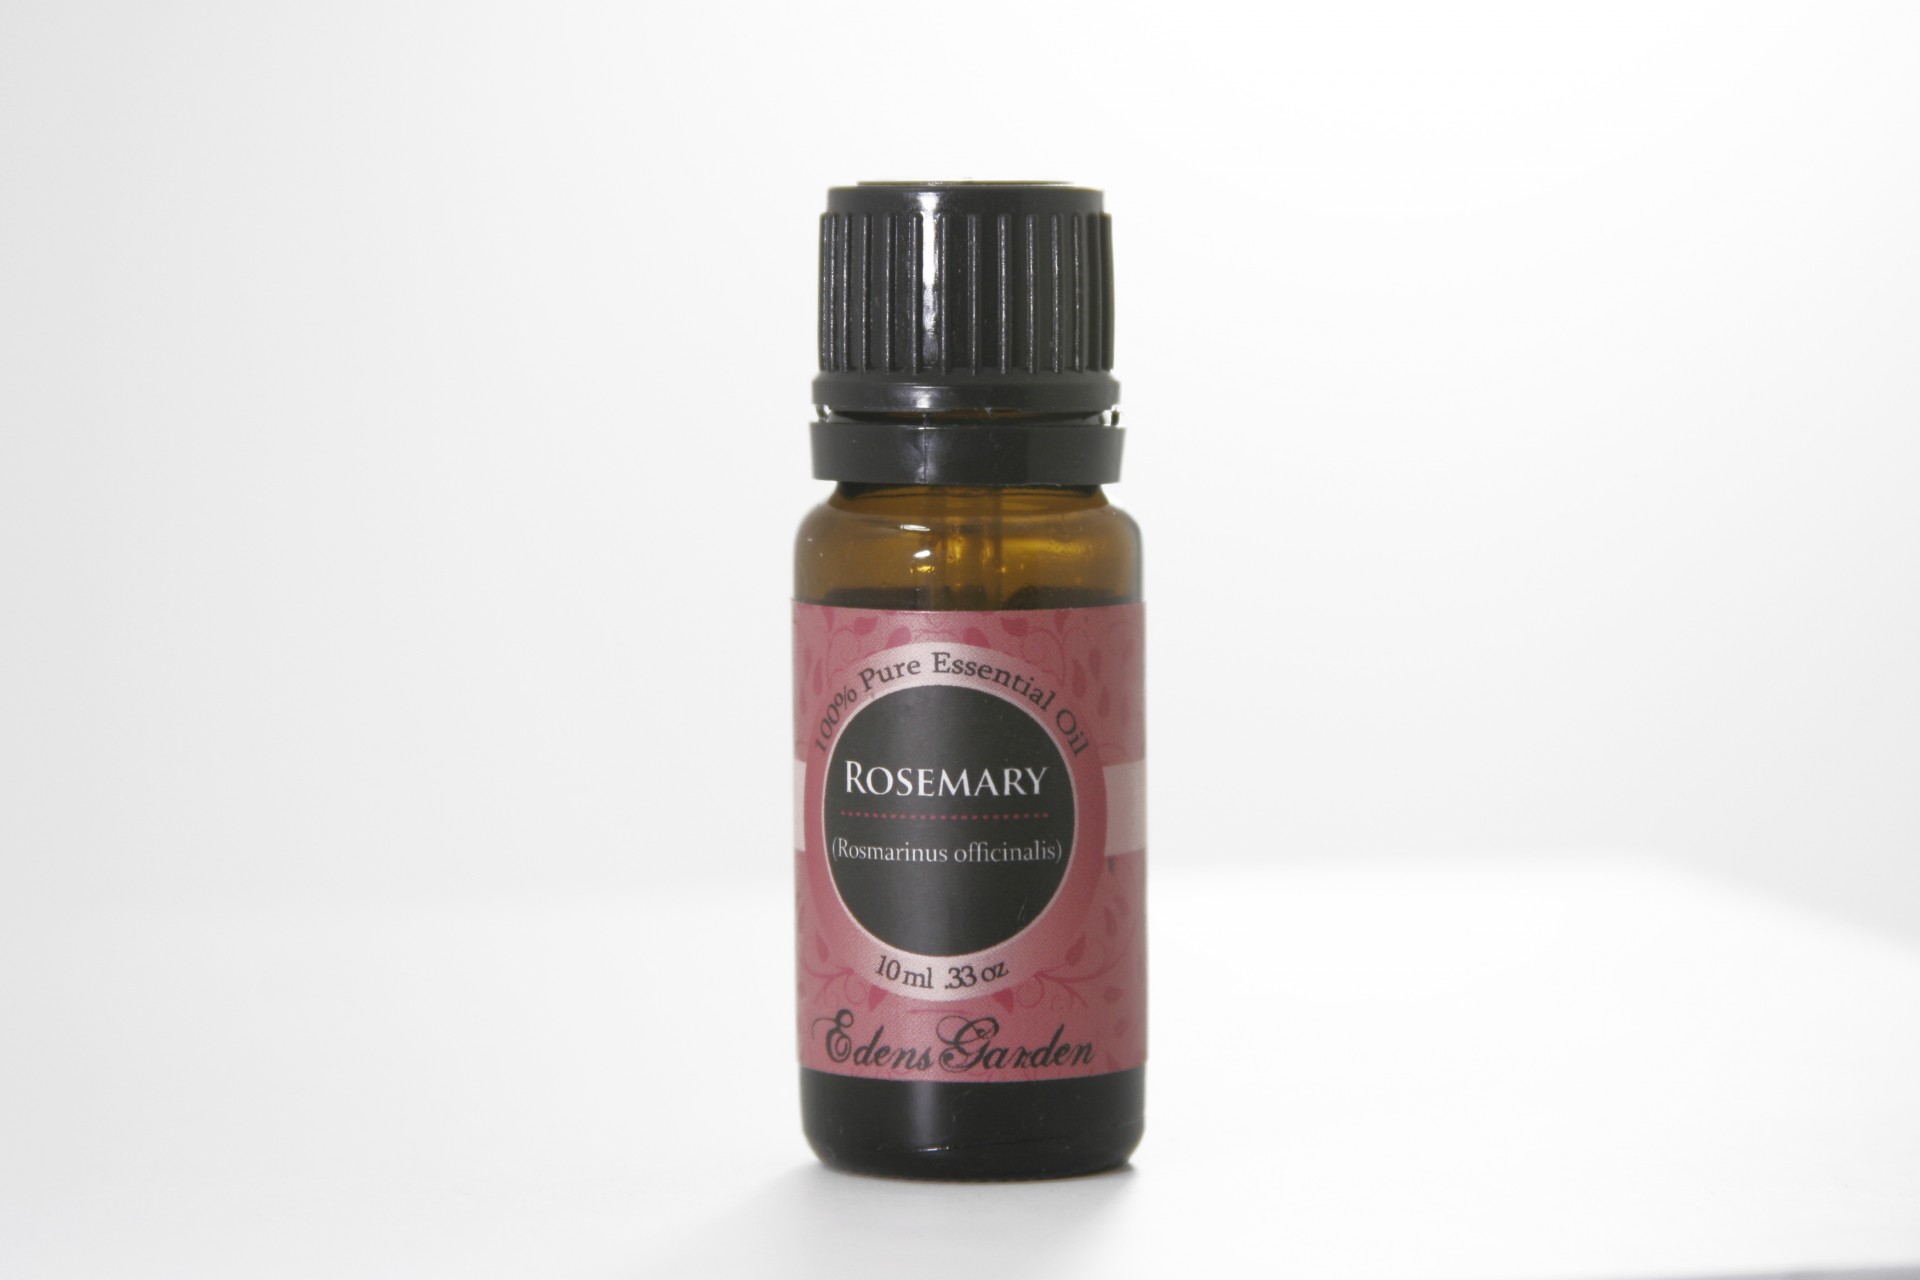 Bottle of rosemary scented essential oil.